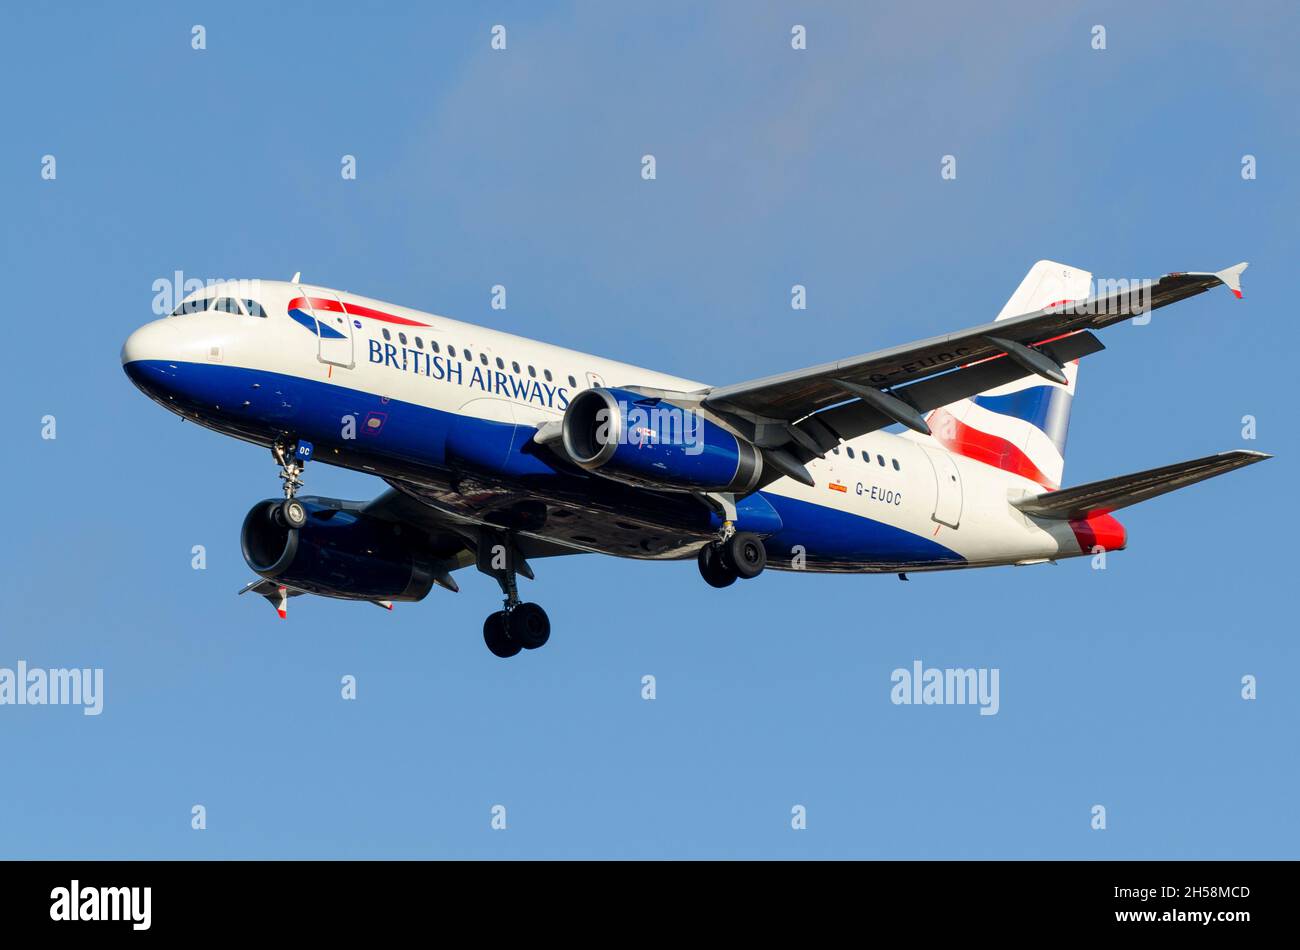 British Airways Airbus A319 airliner jet plane G-EUOC on approach to land at London Heathrow Airport, UK, in blue sky. Old, small short haul airplane Stock Photo